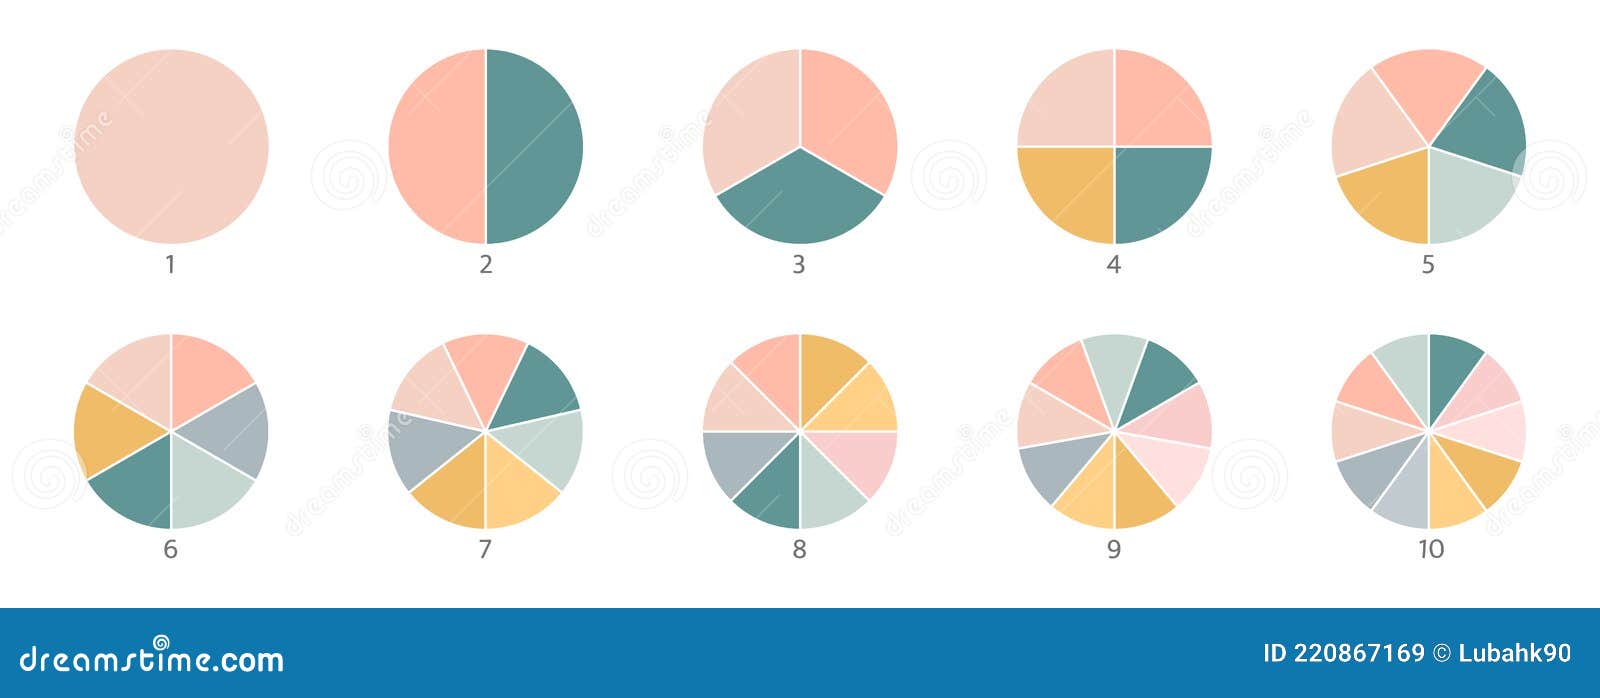 pie chart color icons. segment slice sign. circle section graph. 1,2,3,4,5 segment infographic. wheel round diagram part